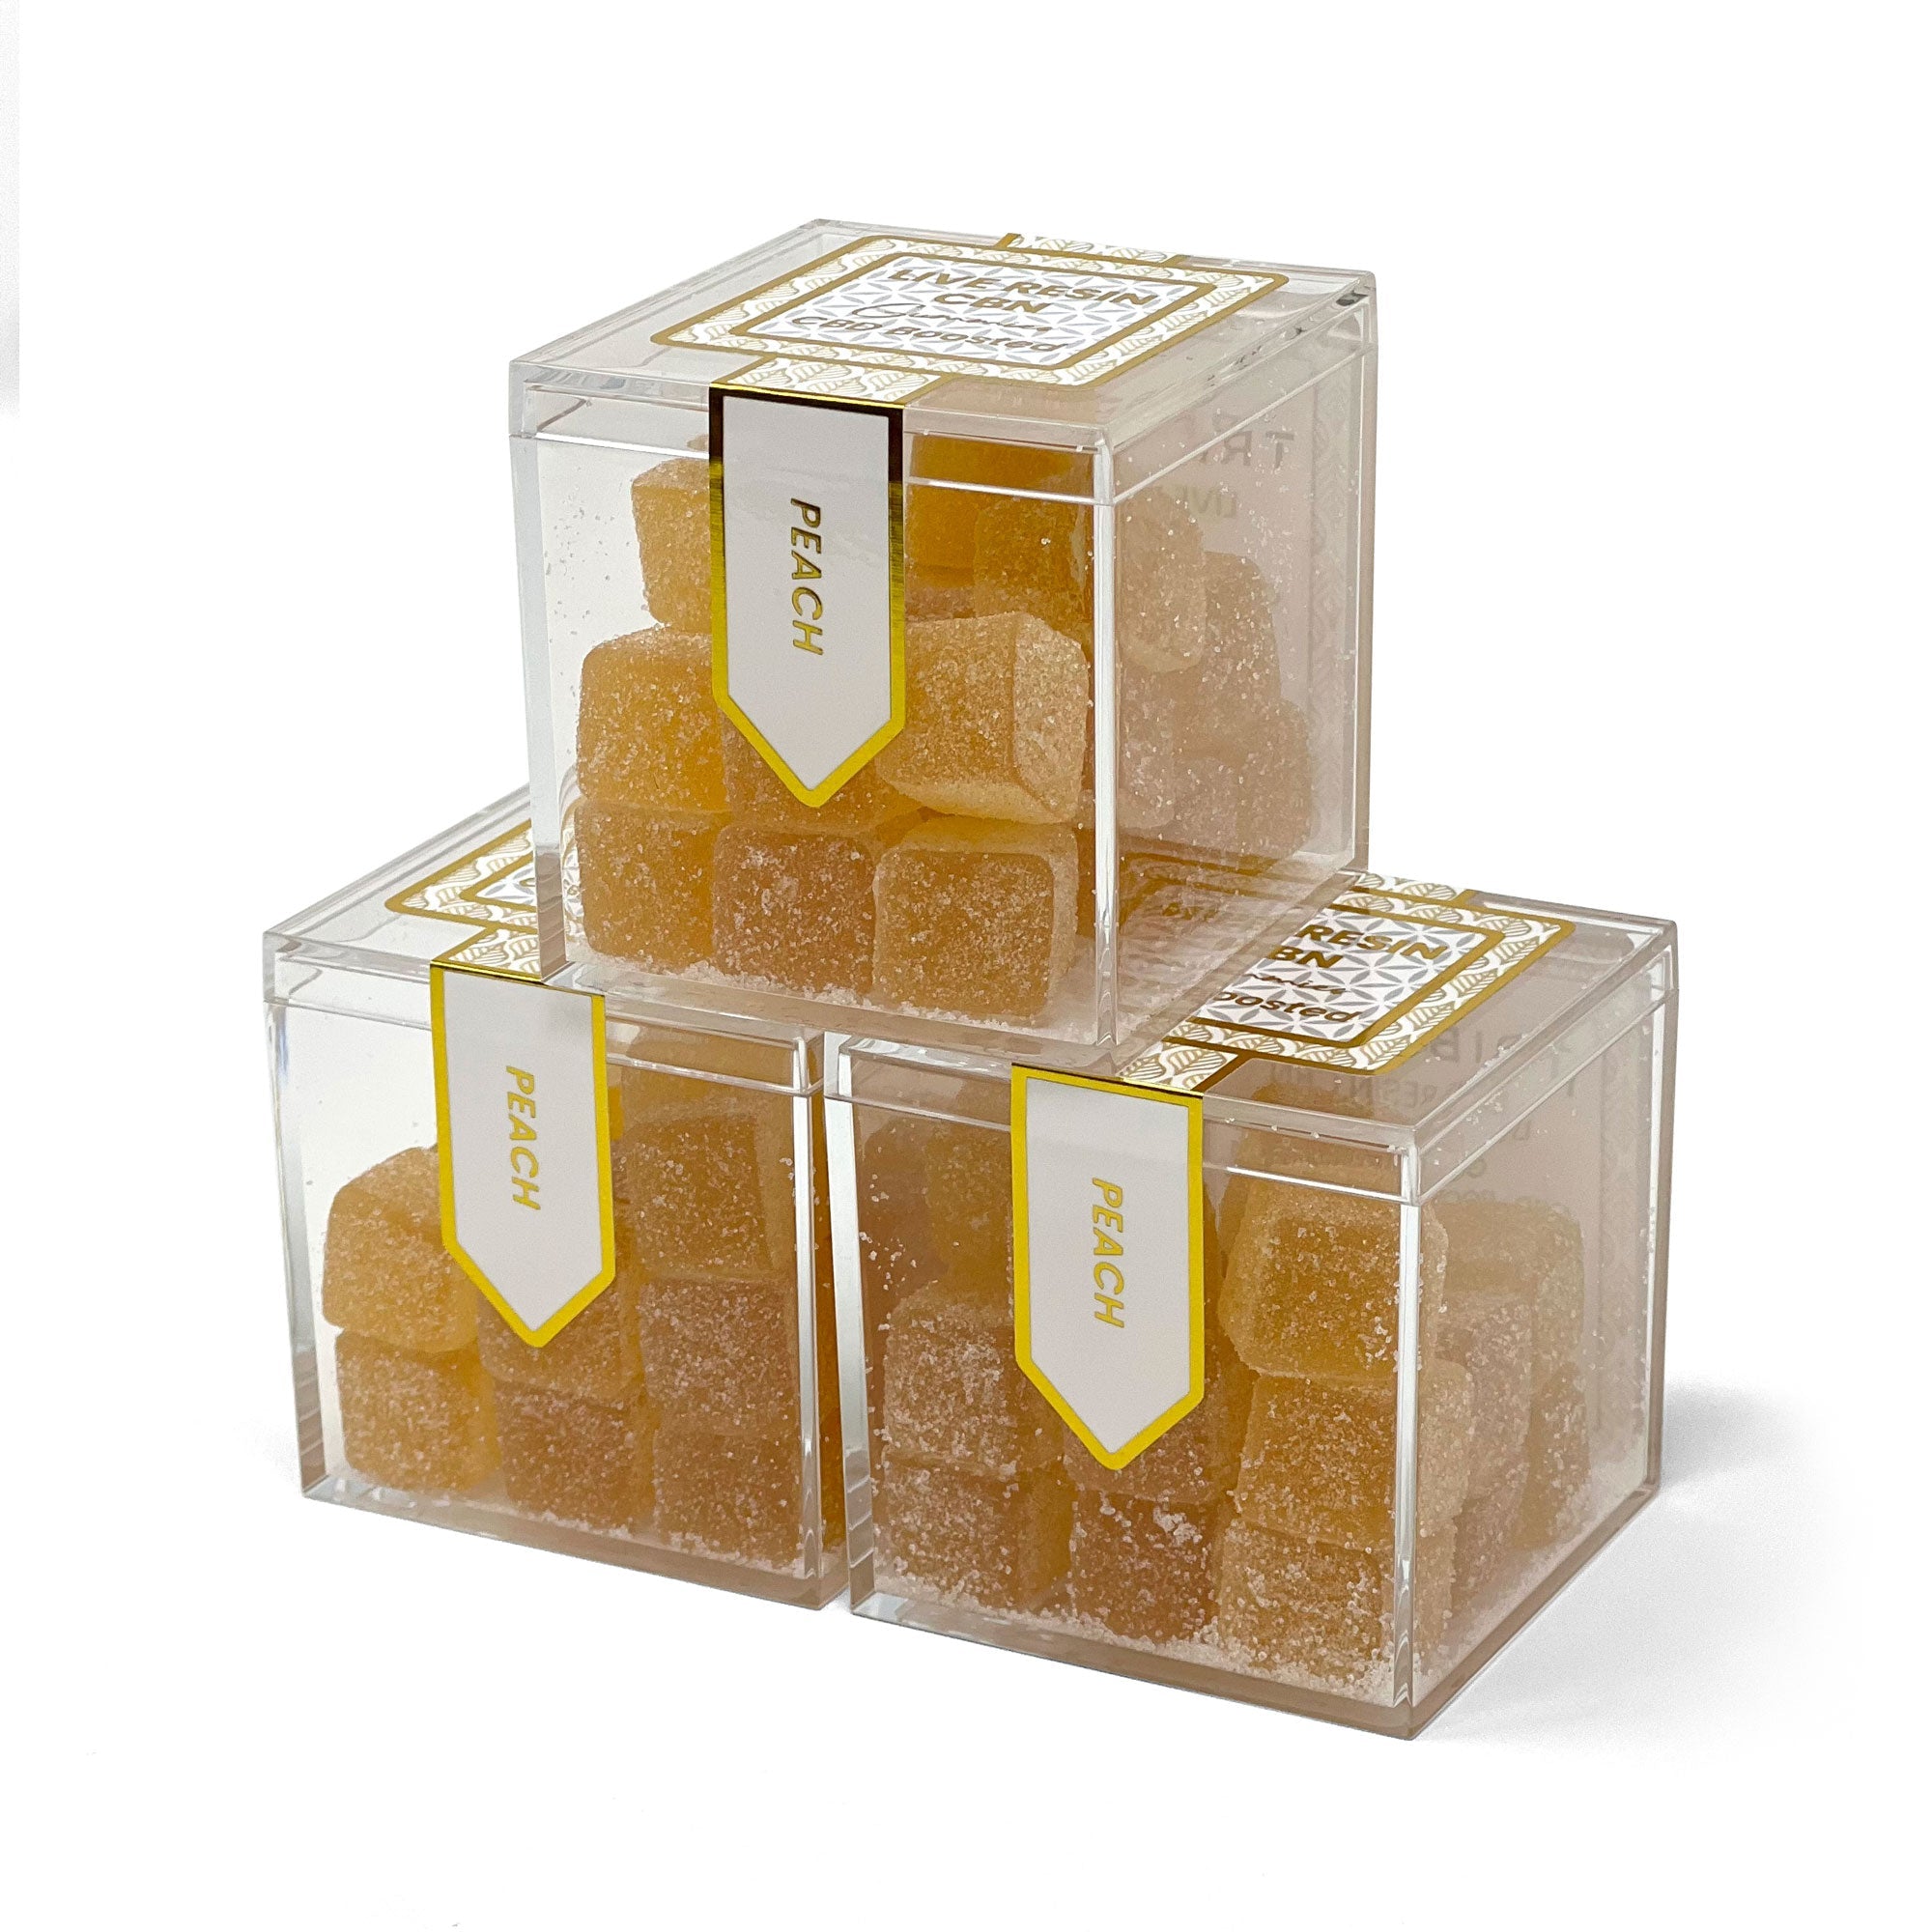 TribeTokes 2-Pack Live Resin CBN Gummies | 600mg | CBD-Boosted (Save $10) Best Price